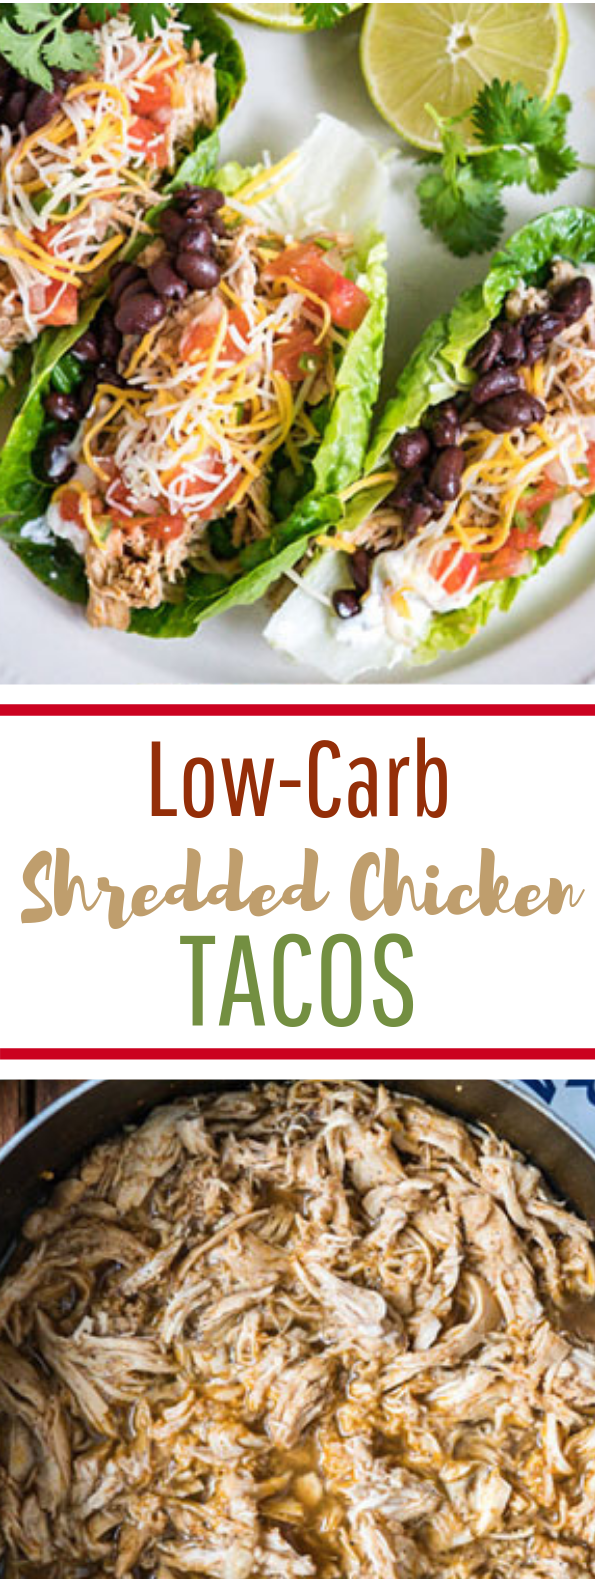 Low-Carb Shredded Chicken Tacos #healthy #keto